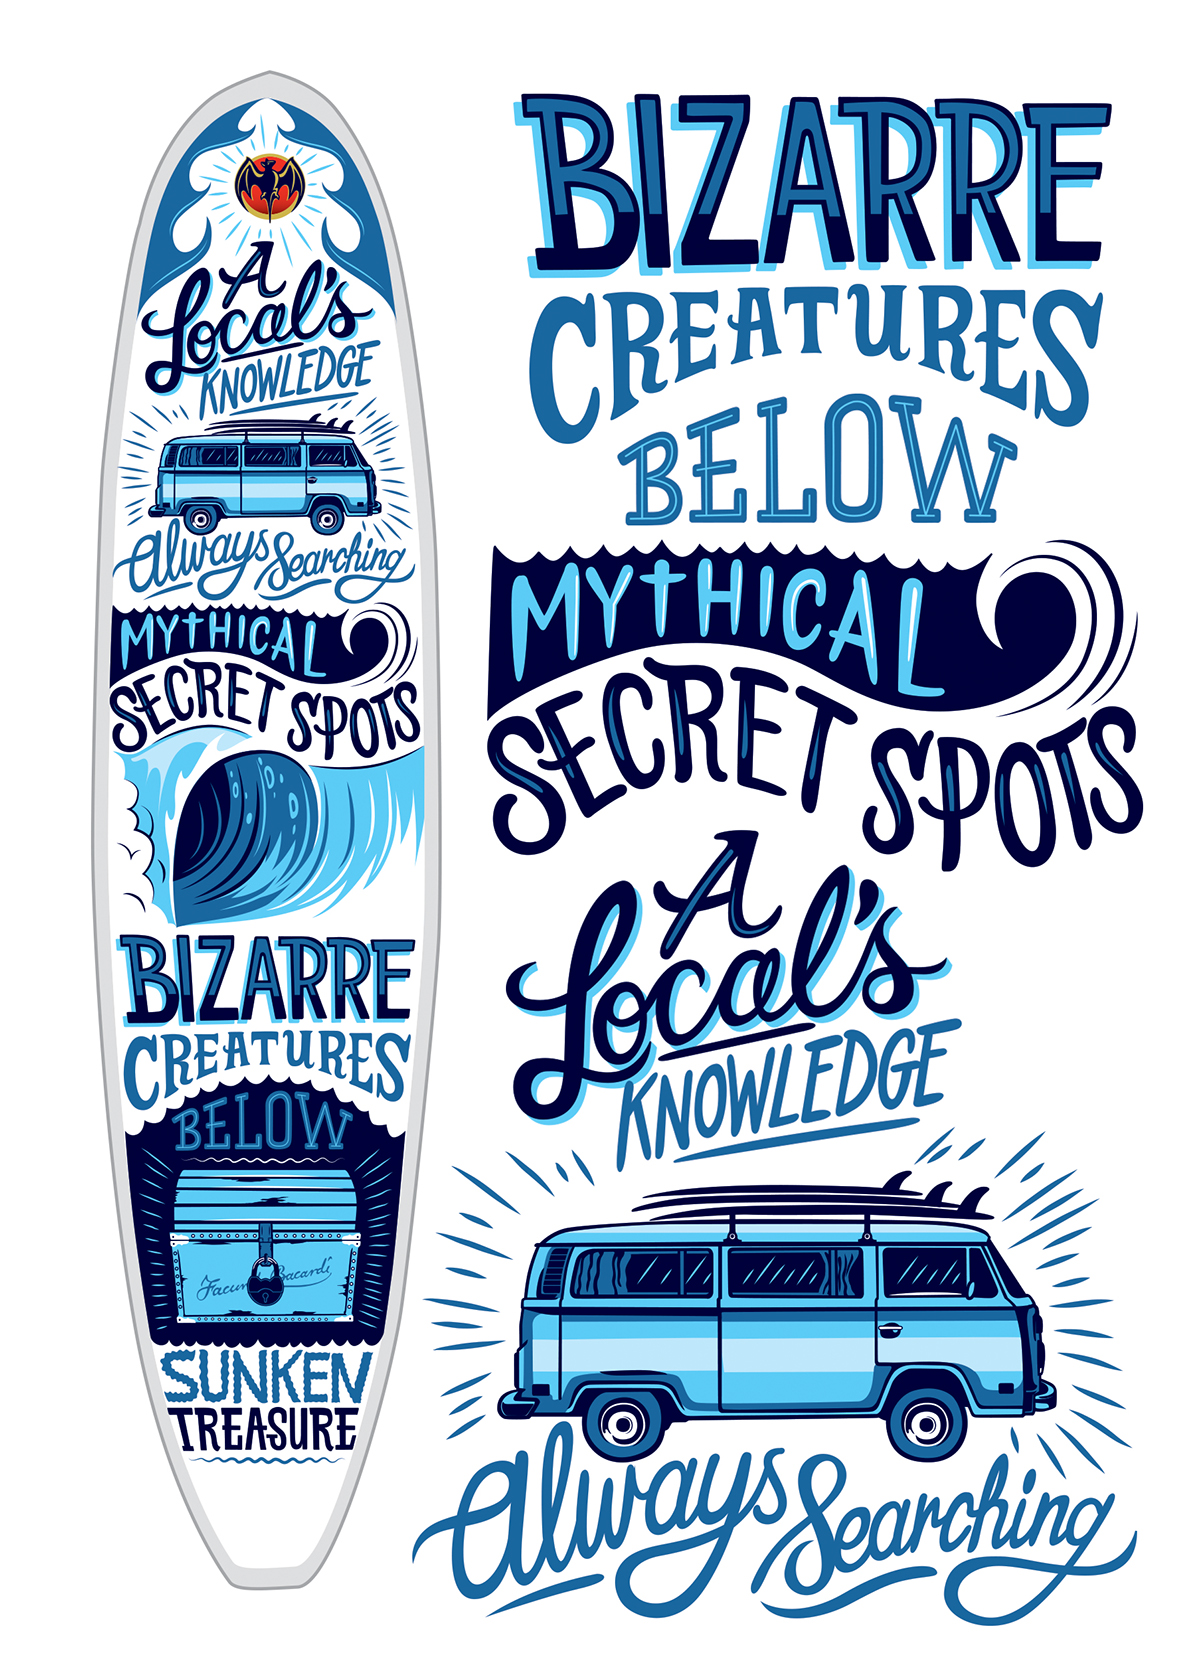 Adobe Portfolio surfboard surfing bacardi lettering Sign Writing design Surf creatures Surf Culture cape town south africa